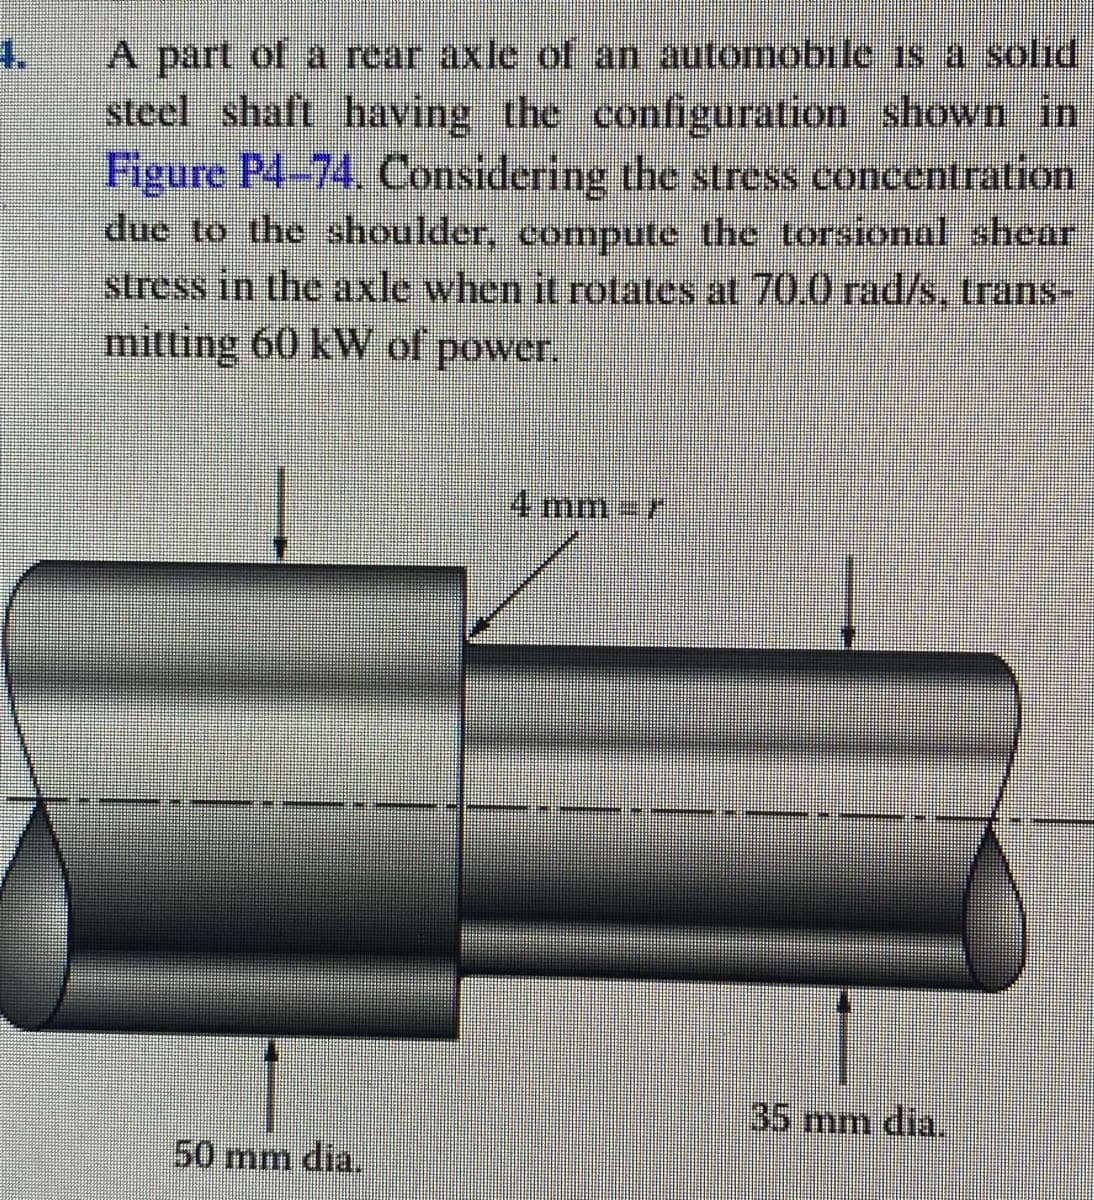 4.
A part ol a rear axle of an automobile is a solid
steel shaft having the configuration shown in
Figure P4-74. Considering the stress concentration
due to the shoulder, compute the torsional shear
stress in the axle when it rotates at 70.0 rad/s, trans-
mitting 60 kW of power.
4mm3r
35 mm dia.
50 mm dia.
